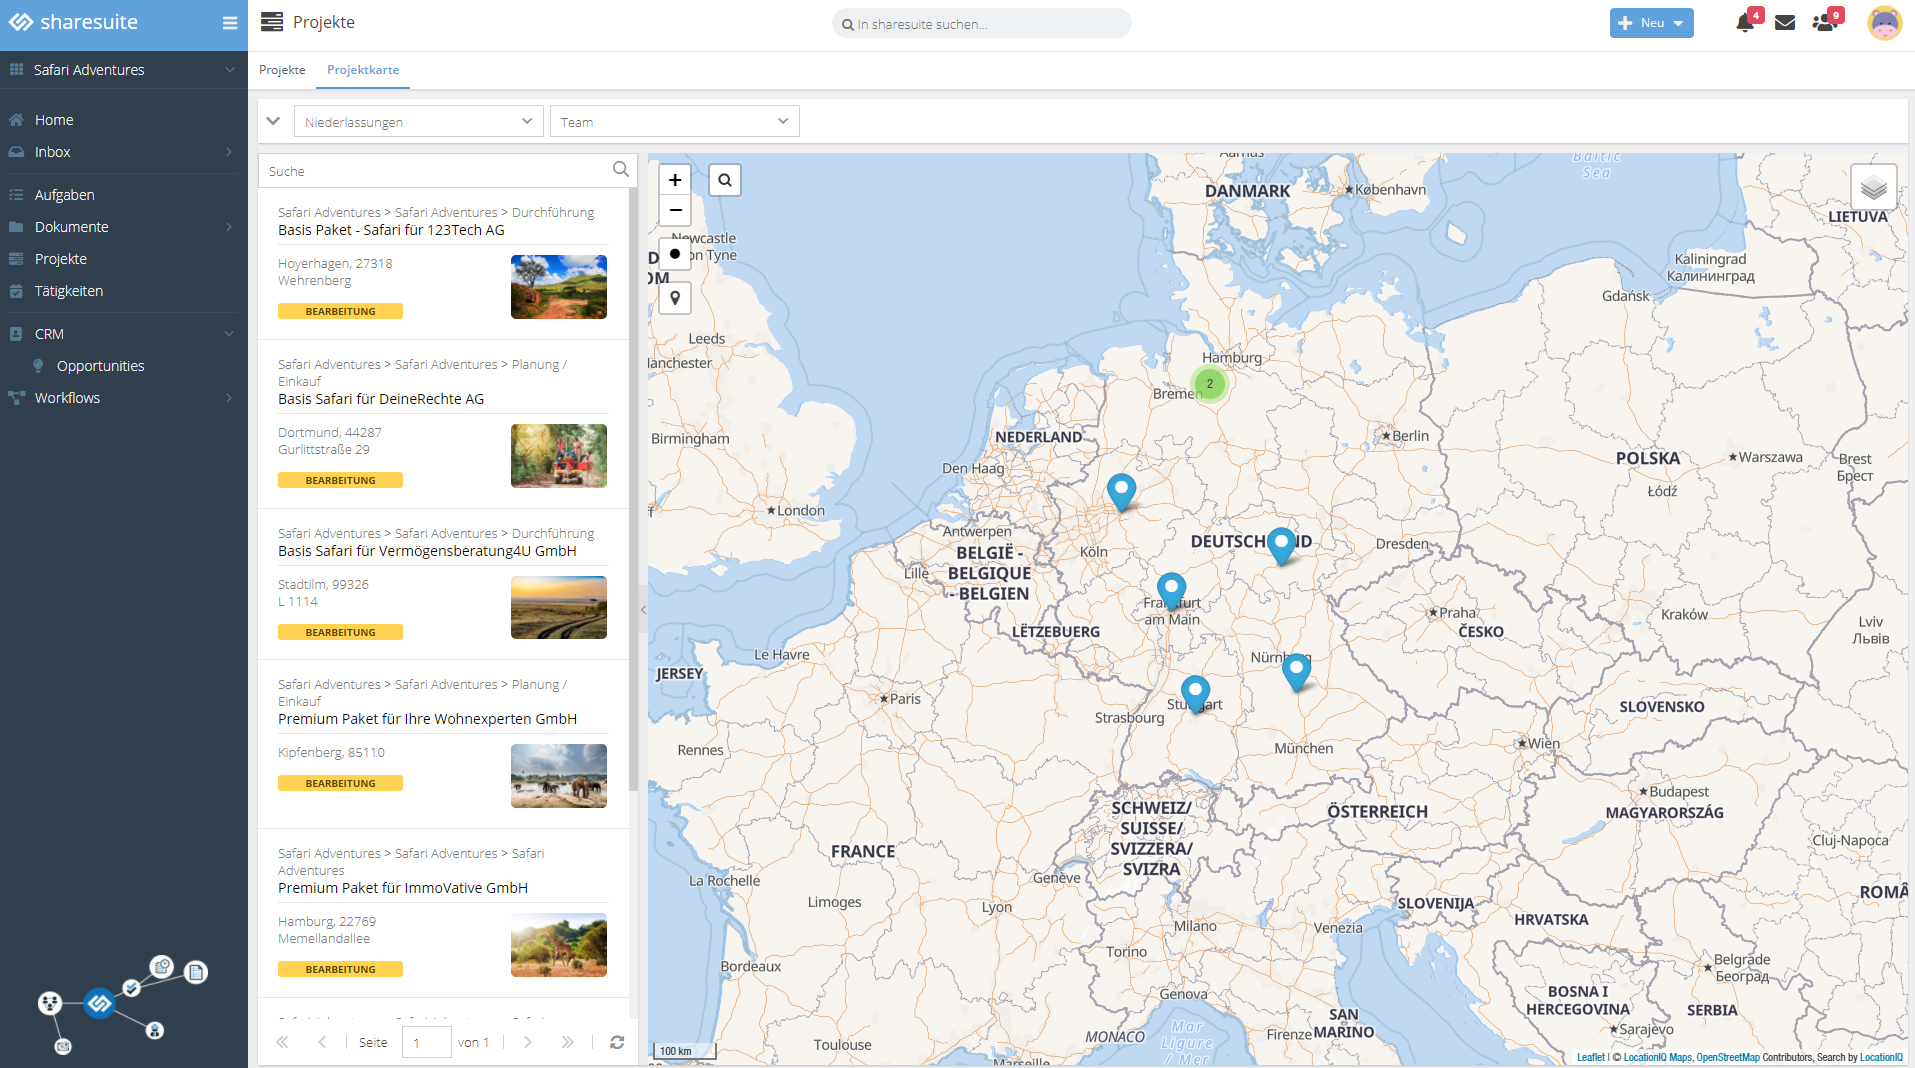 sharesuite Software - The project map visualizes project information and its interrelationships.